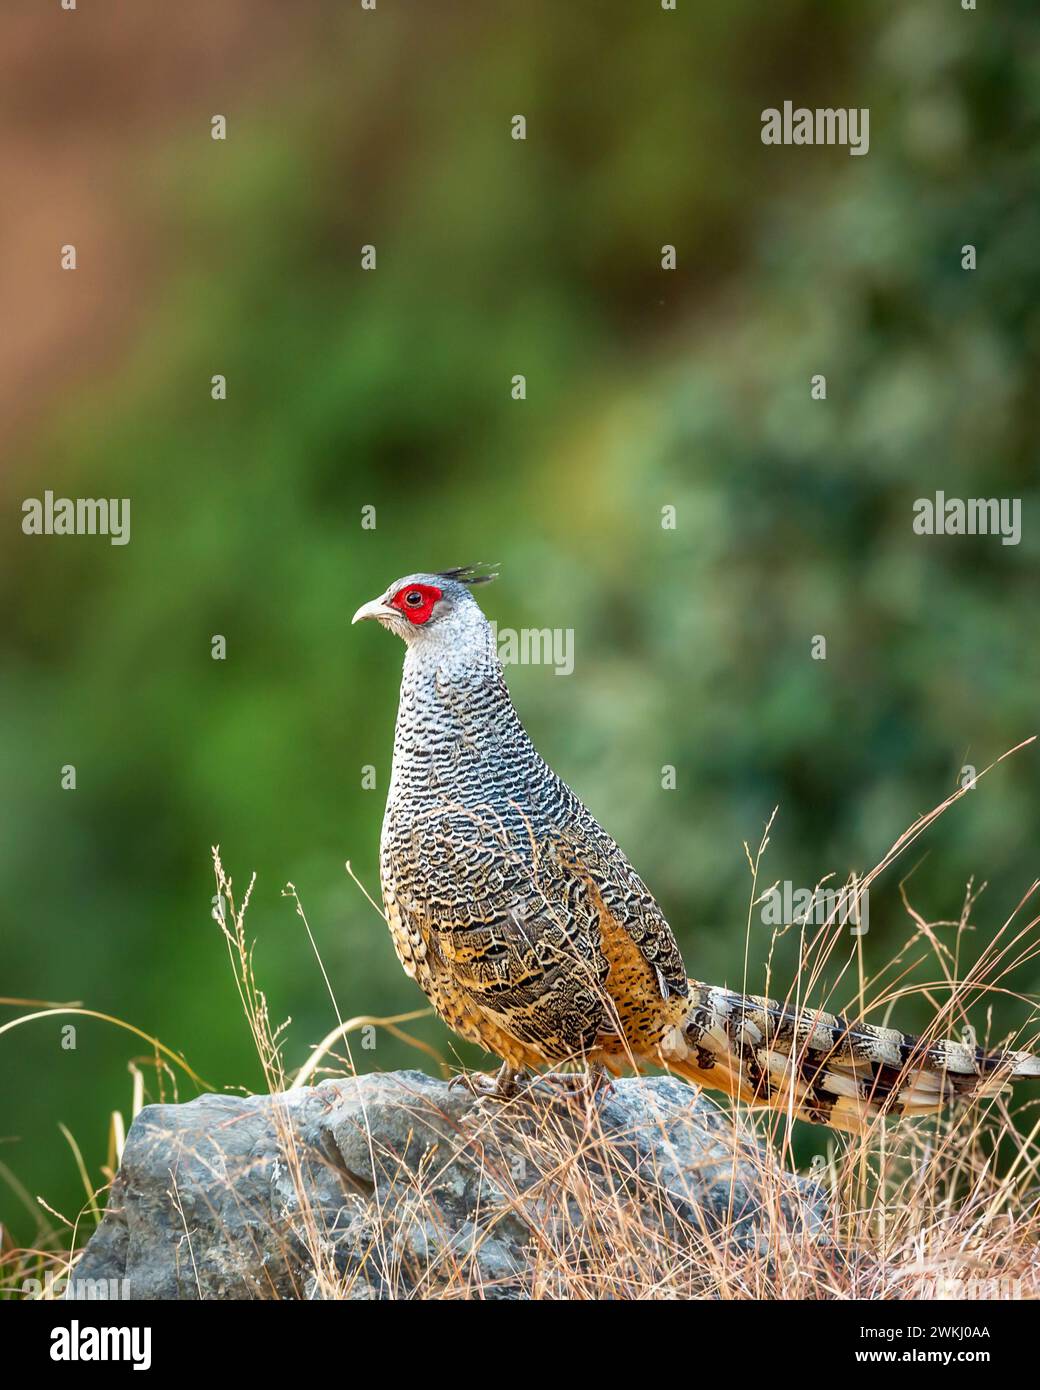 cheer pheasant or Catreus wallichii or Wallich's pheasant bird portrait during winter migration perched on big rock in natural green background india Stock Photo